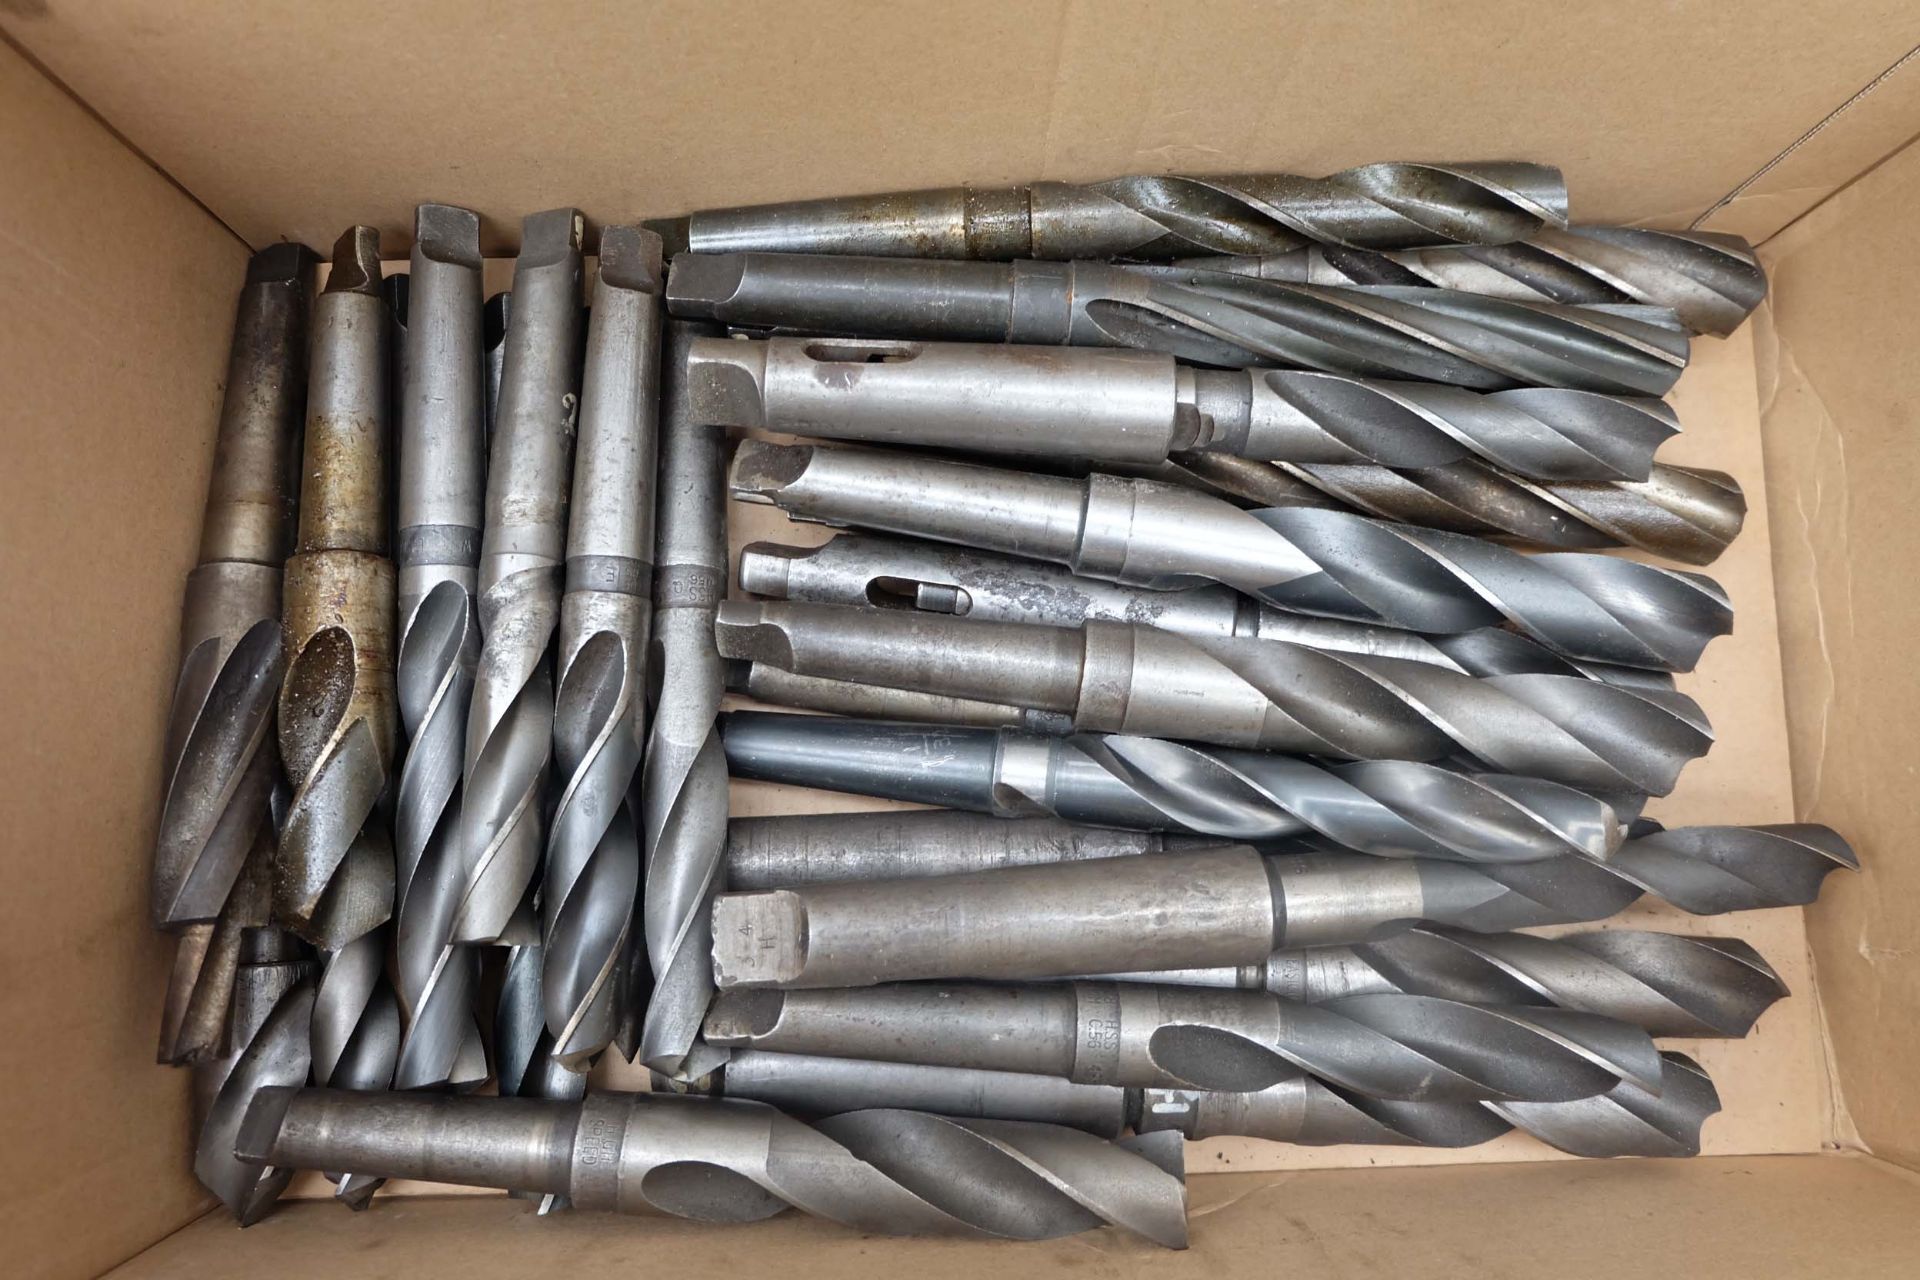 Quantity of Twist Drills. All No. 3 Morse Taper. Some With 4MT Sleeves.